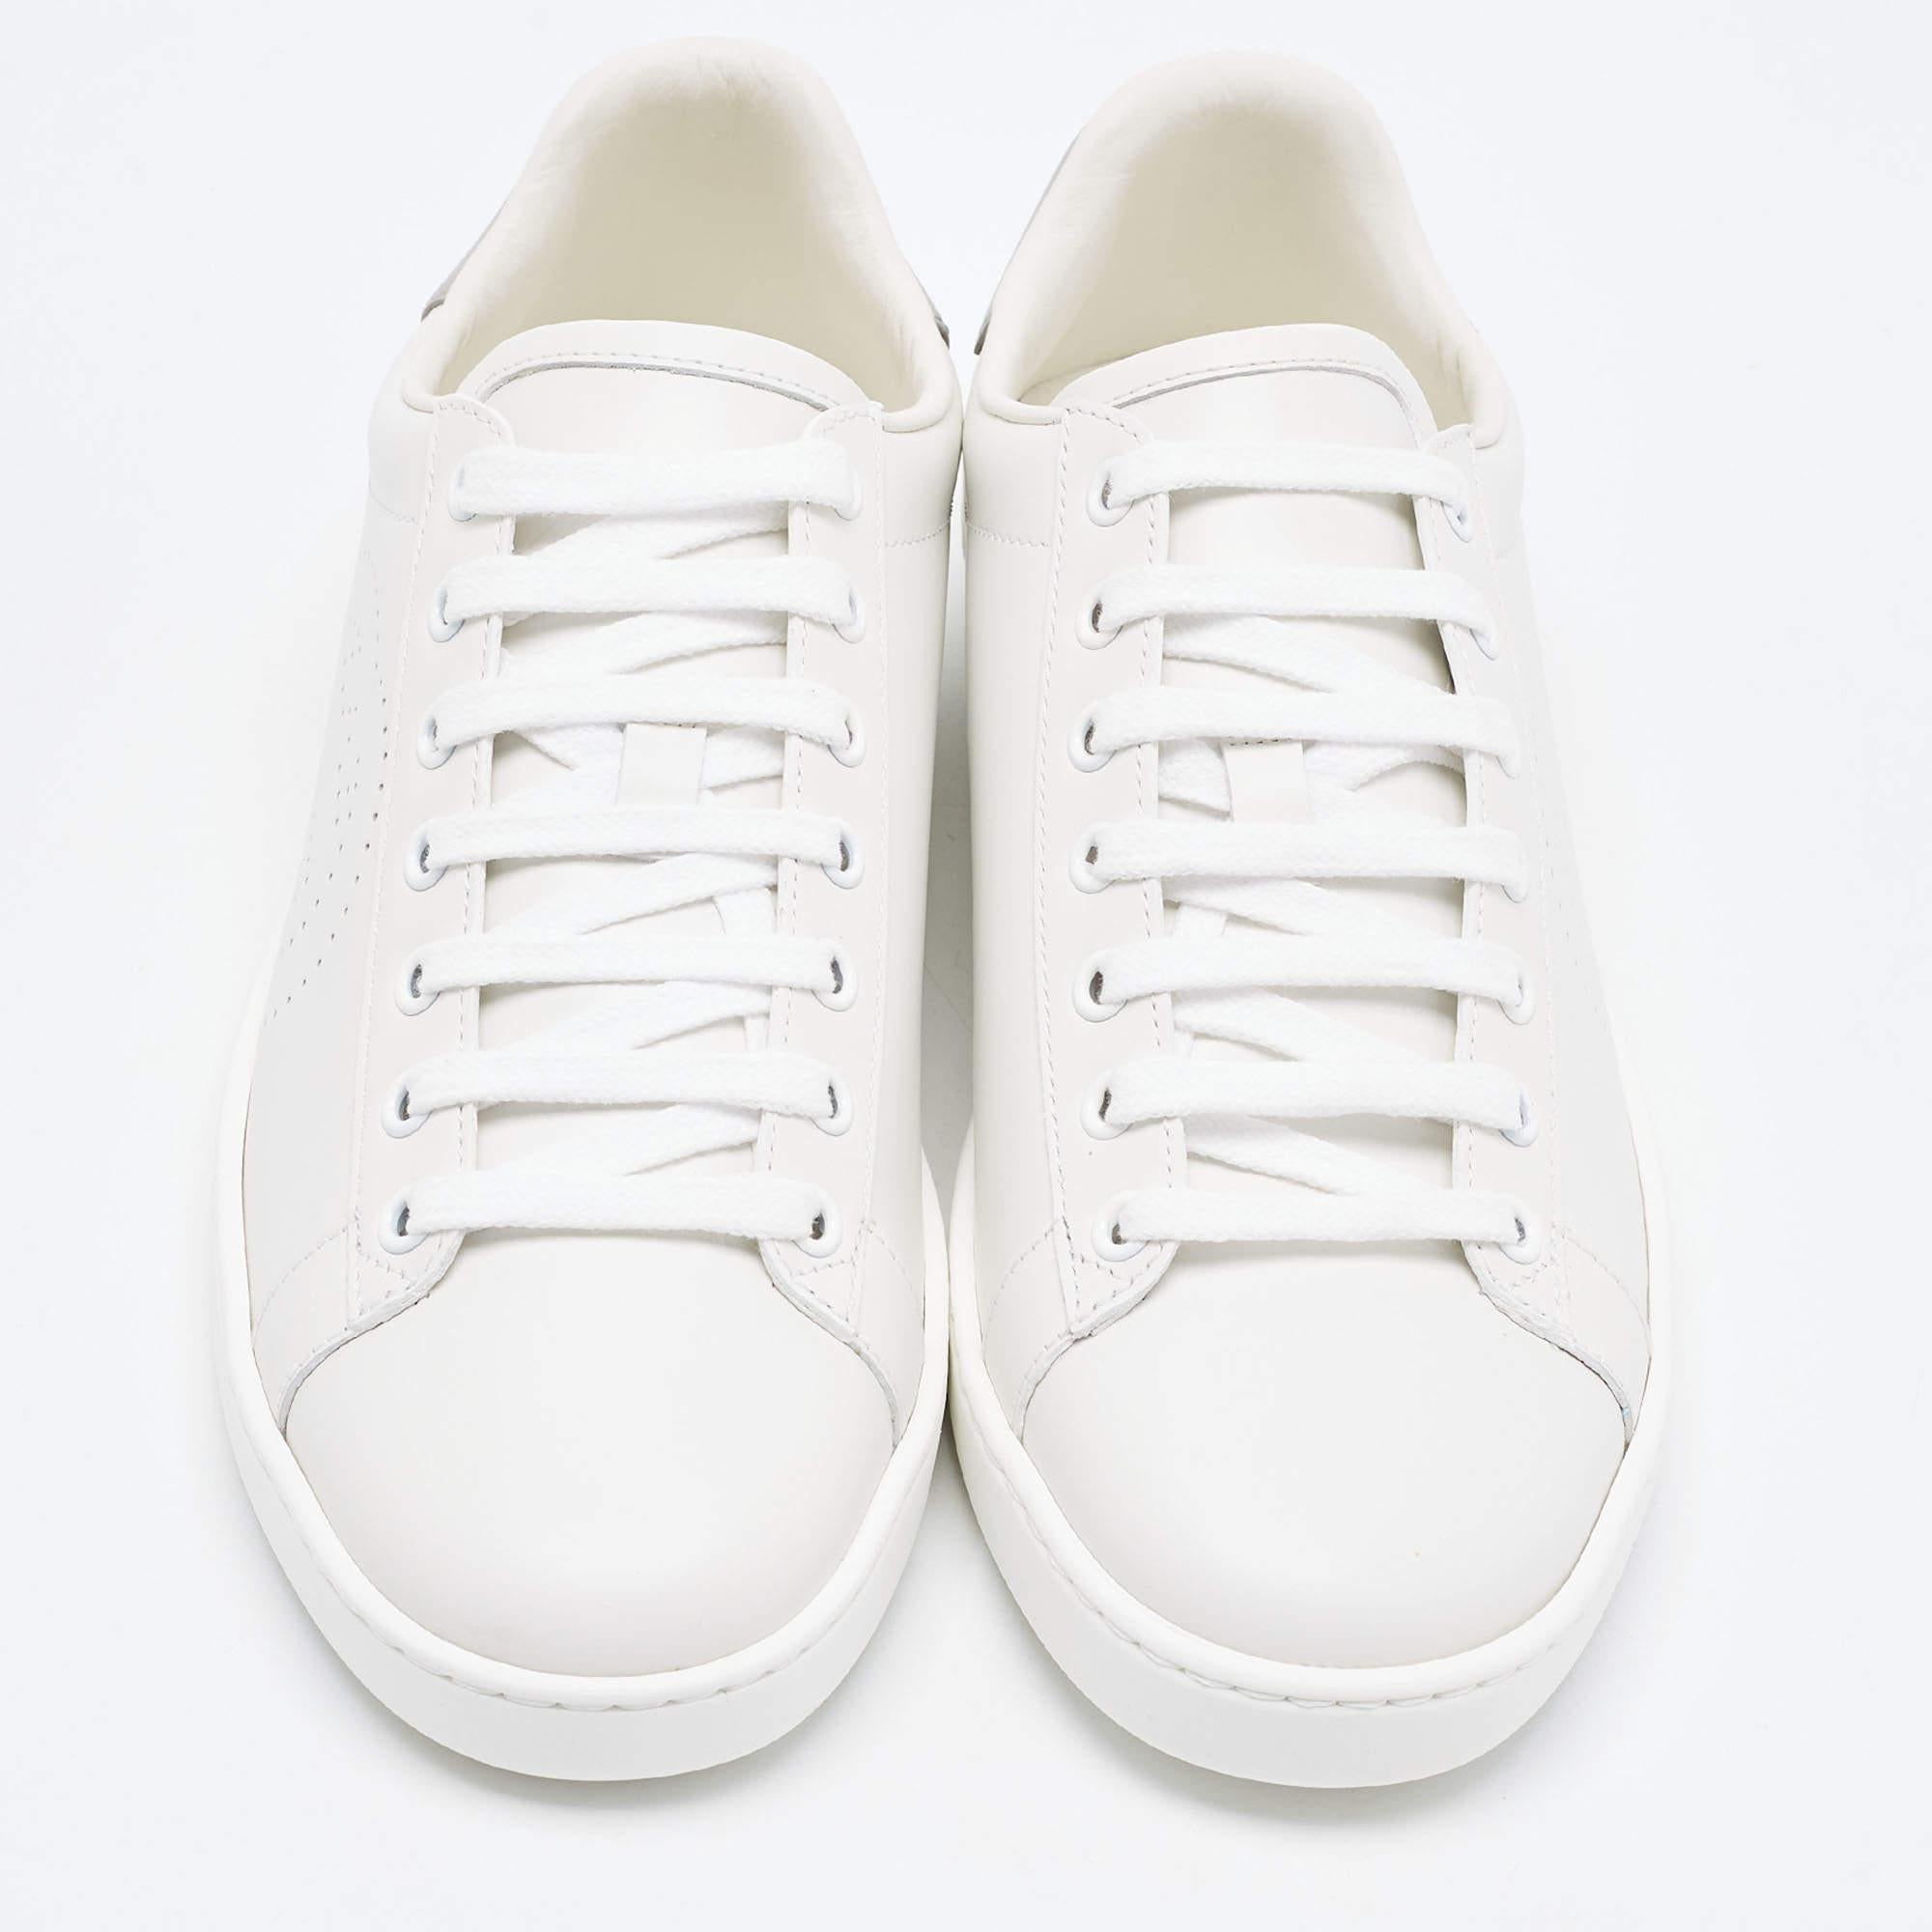 Give your outfit a chic update with this pair of designer sneakers. The creation is sewn perfectly to help you make a statement in them for a long time.

Includes
Original Dustbag, Original Box, Extra Lace